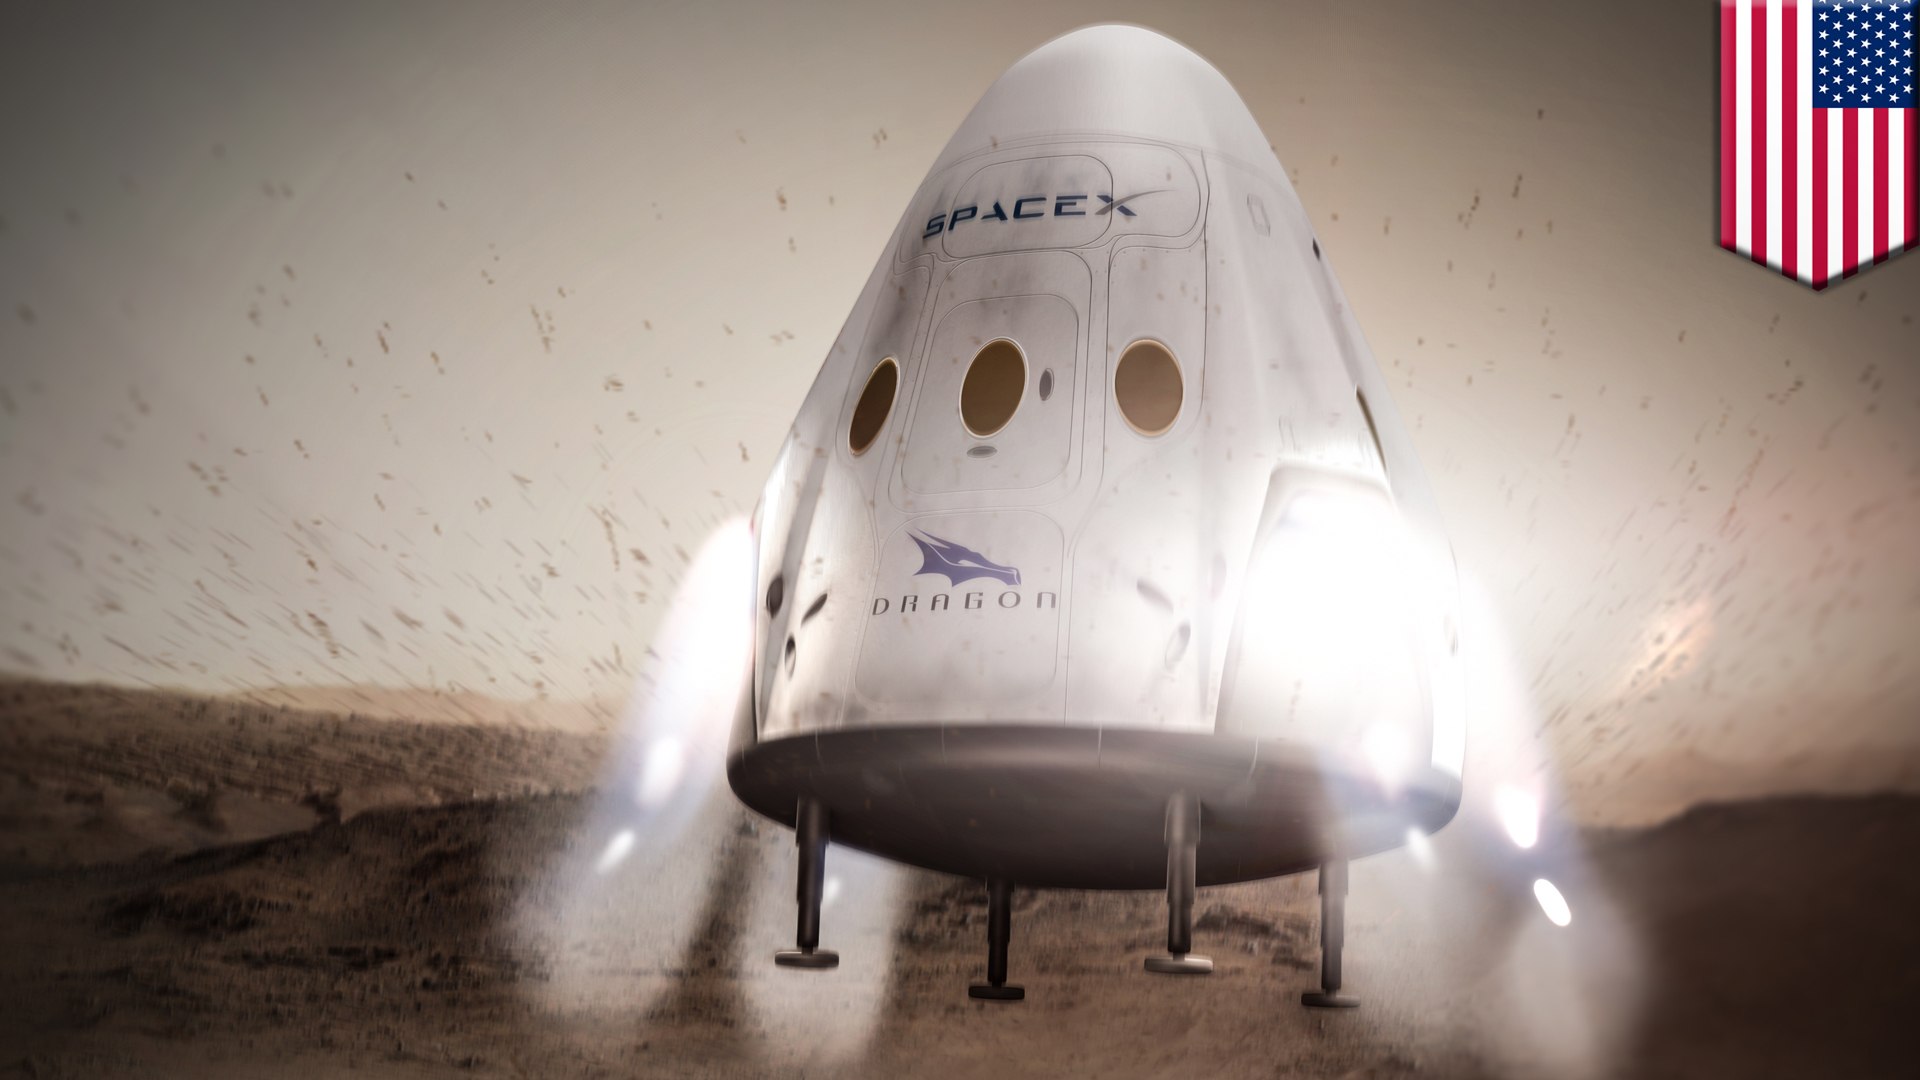 SpaceX plans mission to Mars in 2018